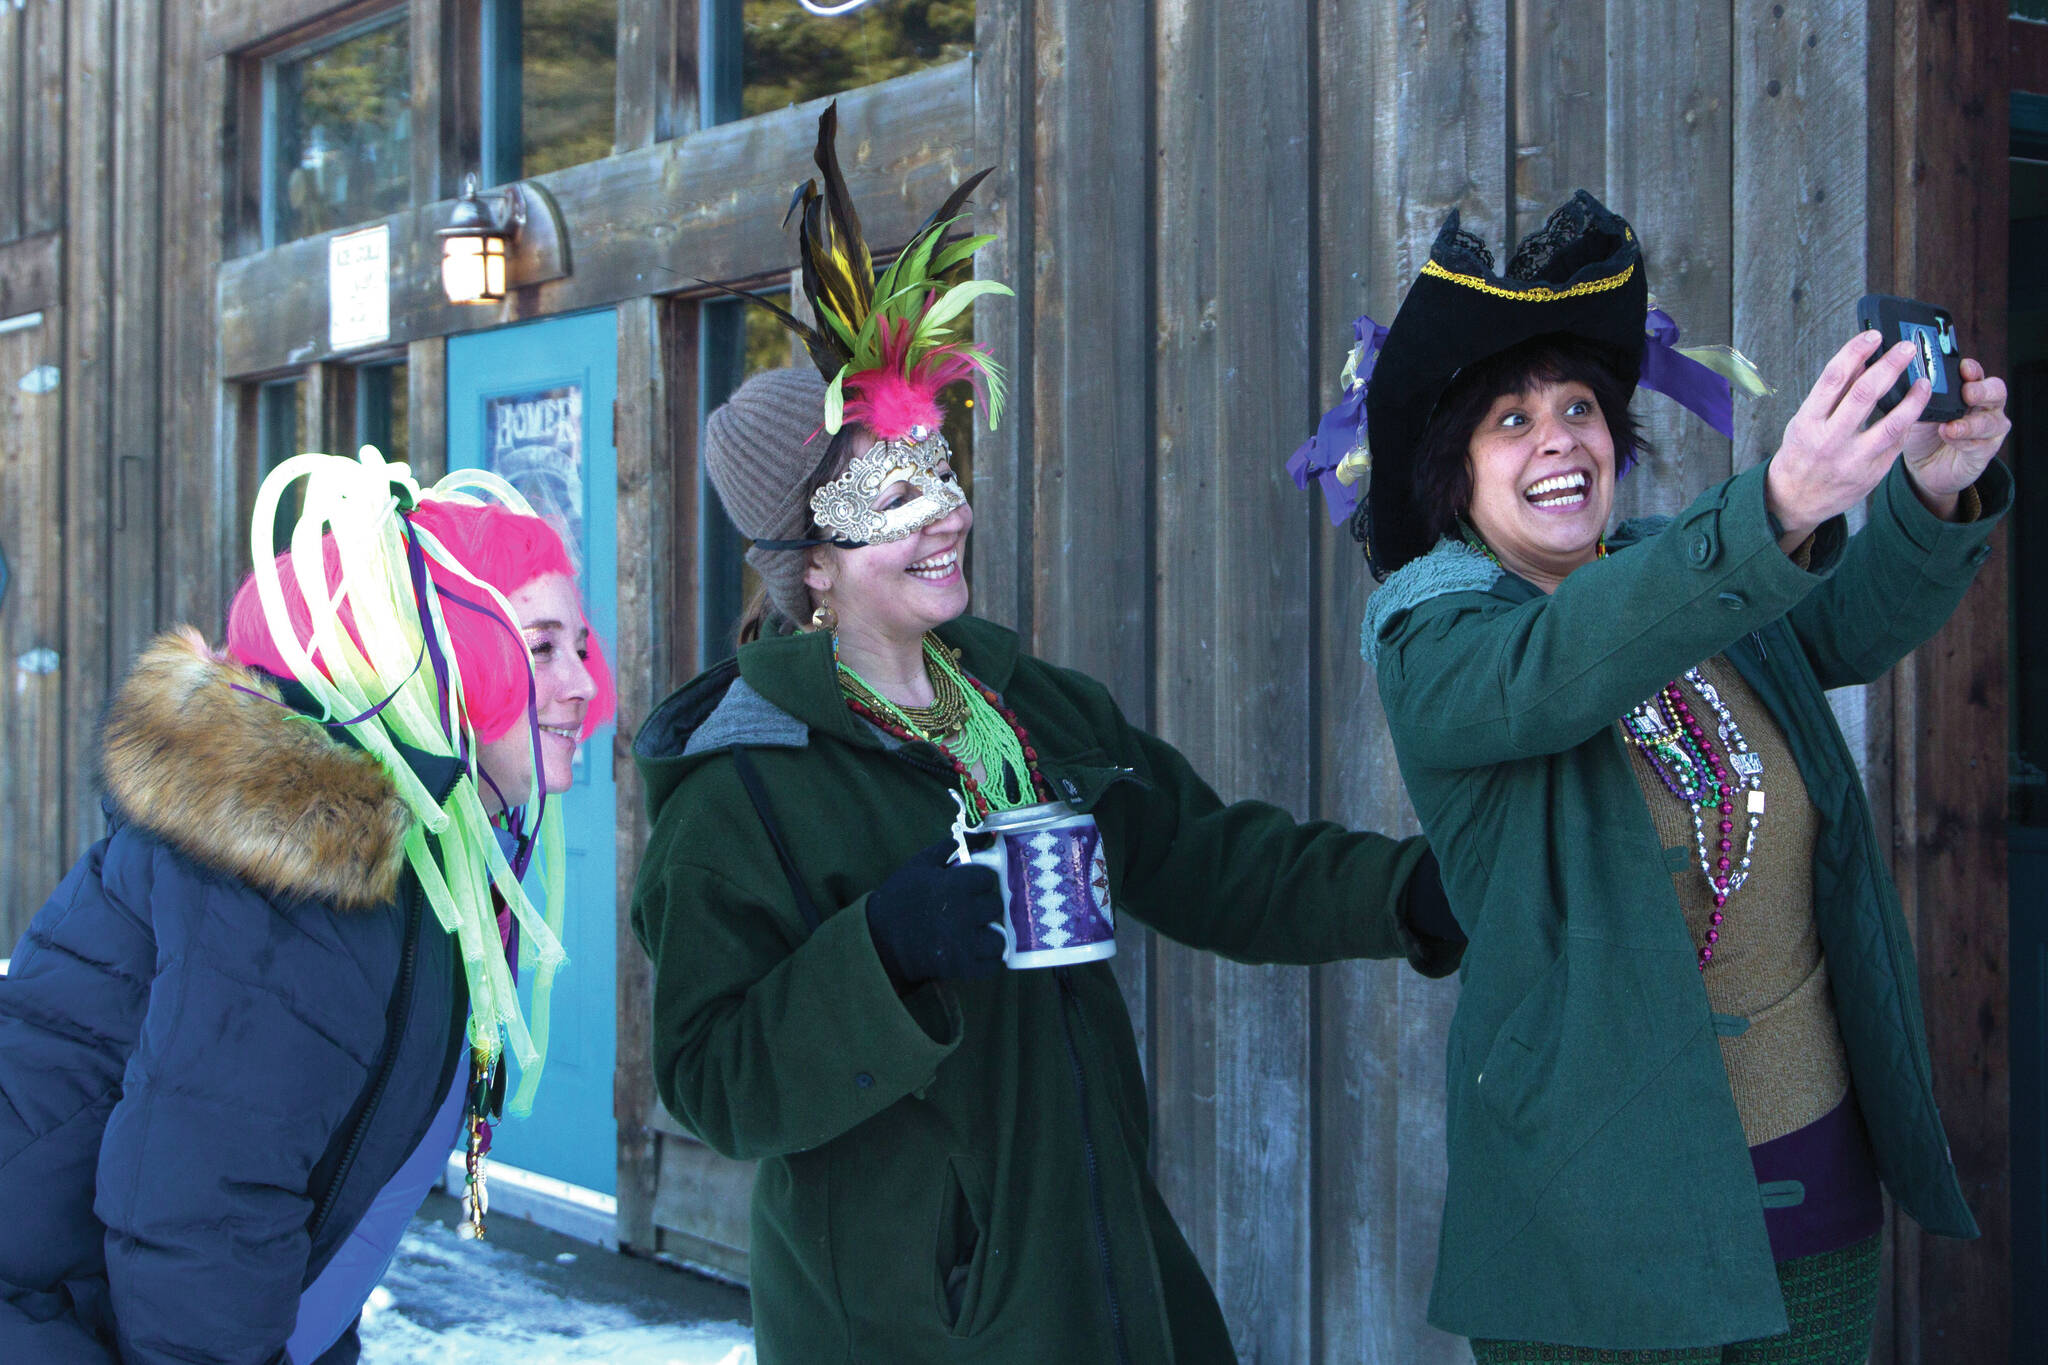 These three ladies are all smiles for the Krewe of Gambrinus Winter Carnival and Mardi Gras parade, Feb. 17. (Photo by Sarah Knapp/Homer News)